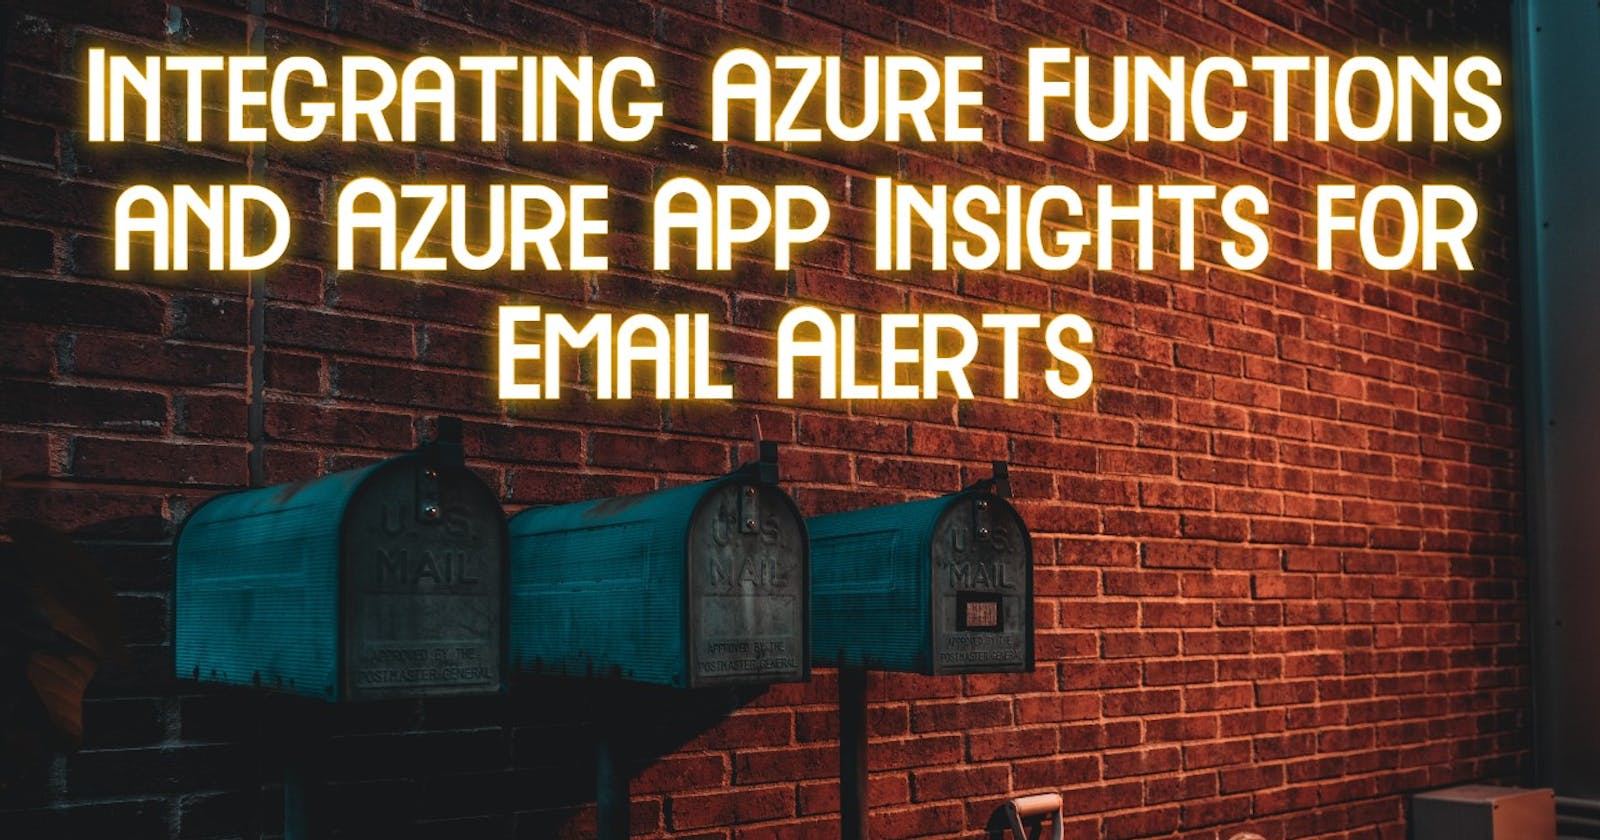 Integrating Azure Functions and Azure App Insights for Email Alerts